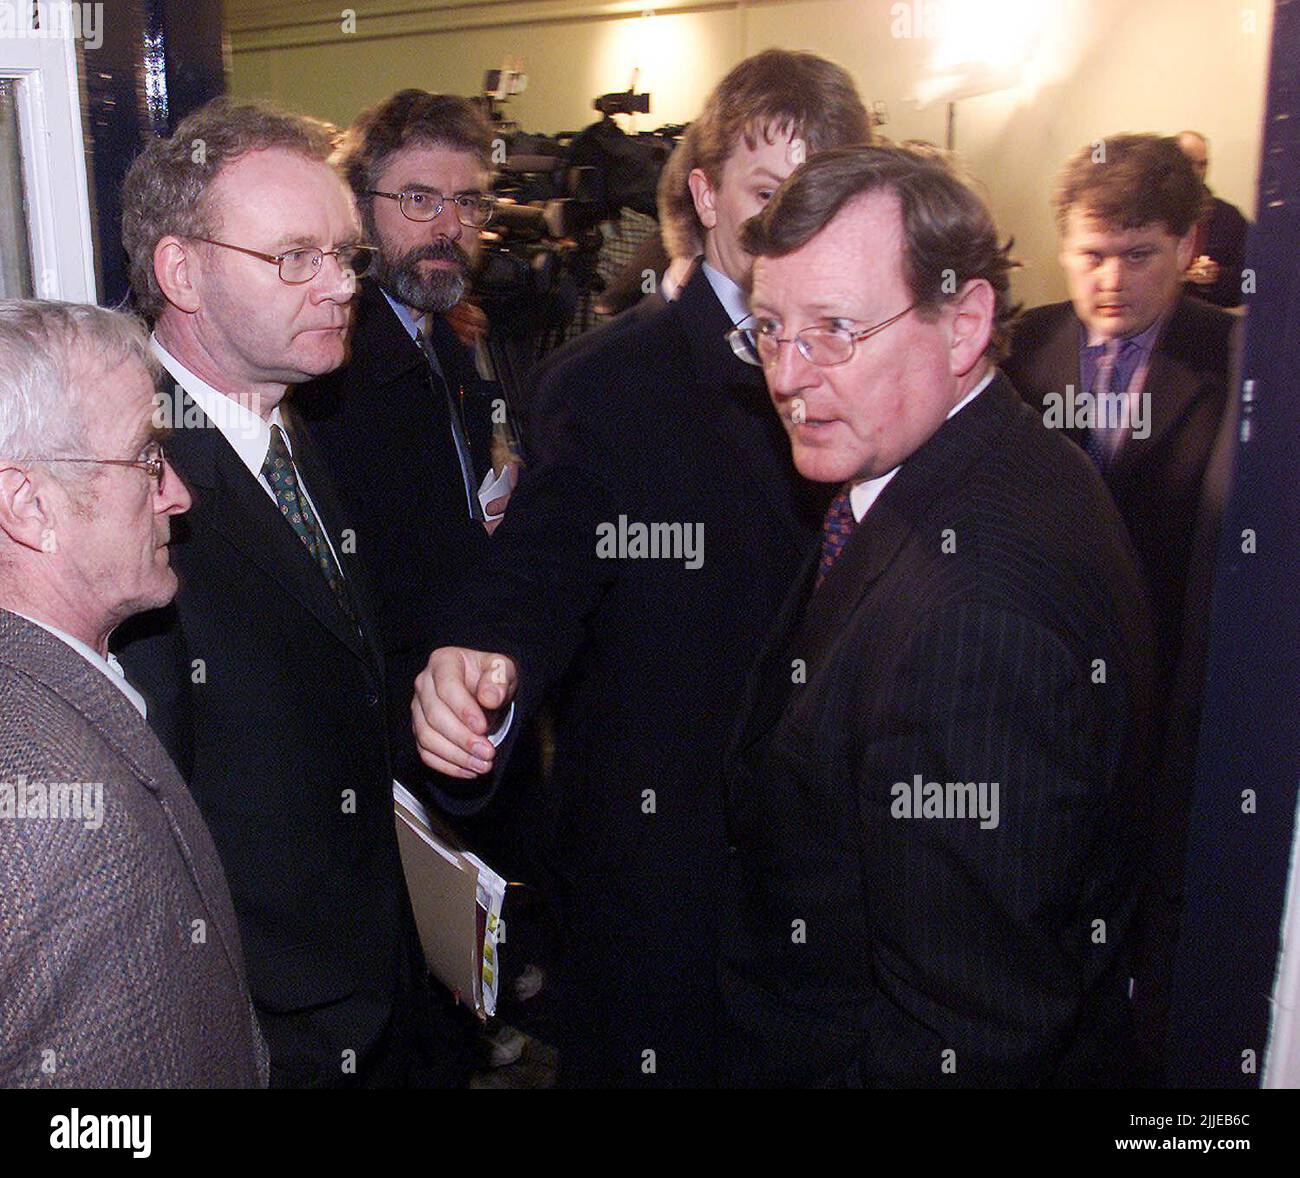 File photo dated 8/3/2001 of Ulster Unionist Leader David Trimble (right) is ushered past Sinn Fein Leader Gerry Adams (3rd left) and Martin McGuinness (2nd left), after talks broke up at Hillsborough Castle. The former Northern Ireland first minister has died, the Ulster Unionist Party has announced. Issue date: Monday July 25, 2022. Stock Photo